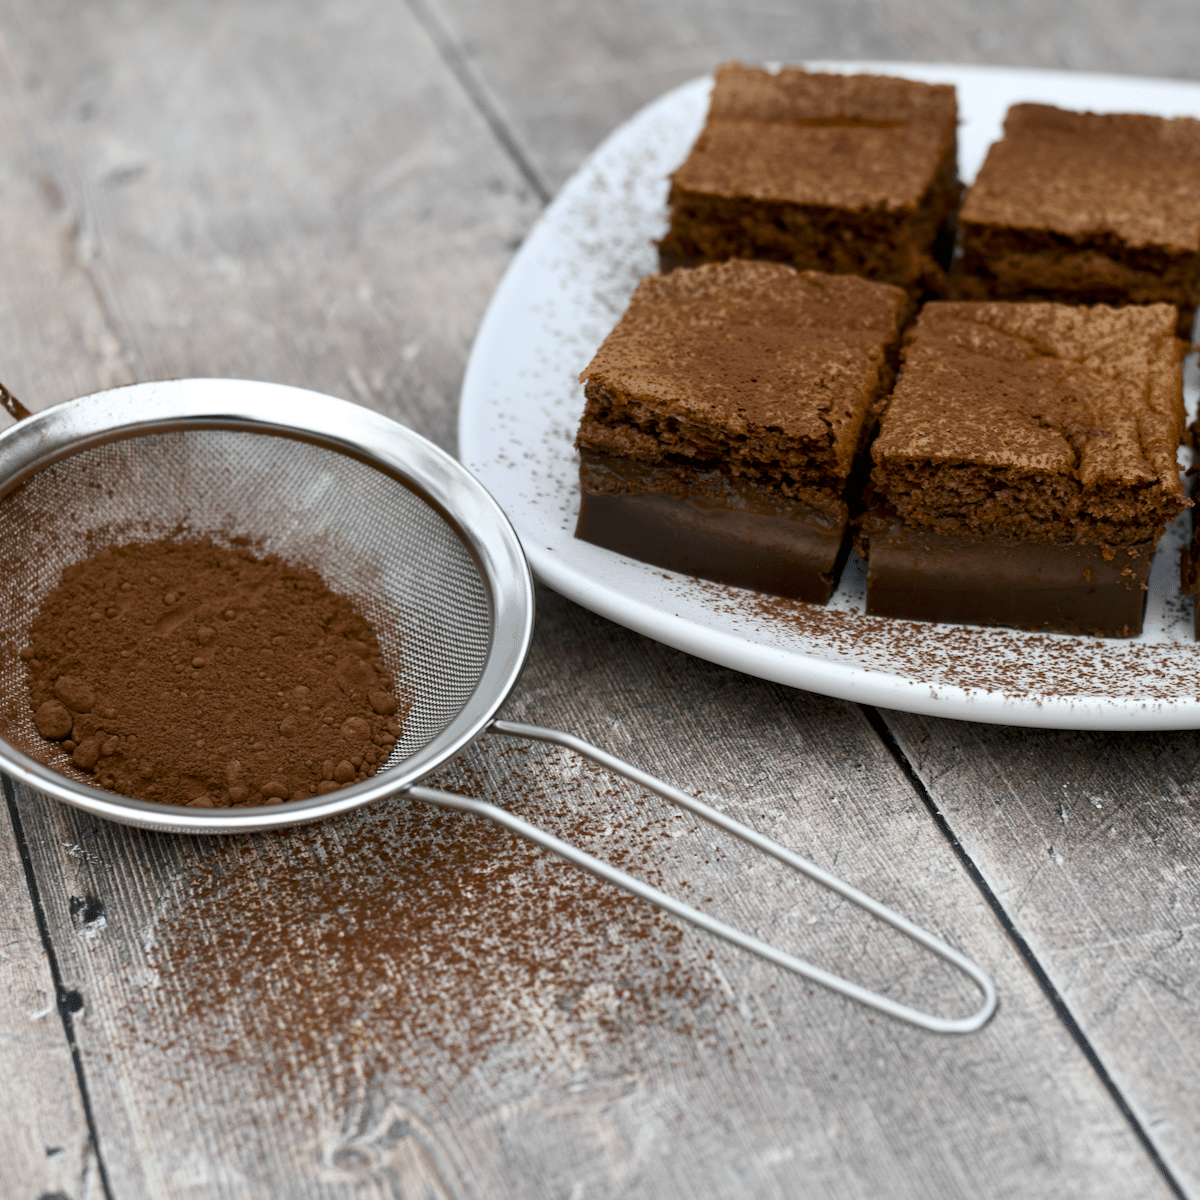 A plate of chocolate magic cake with a sifter filled with cocoa powder.